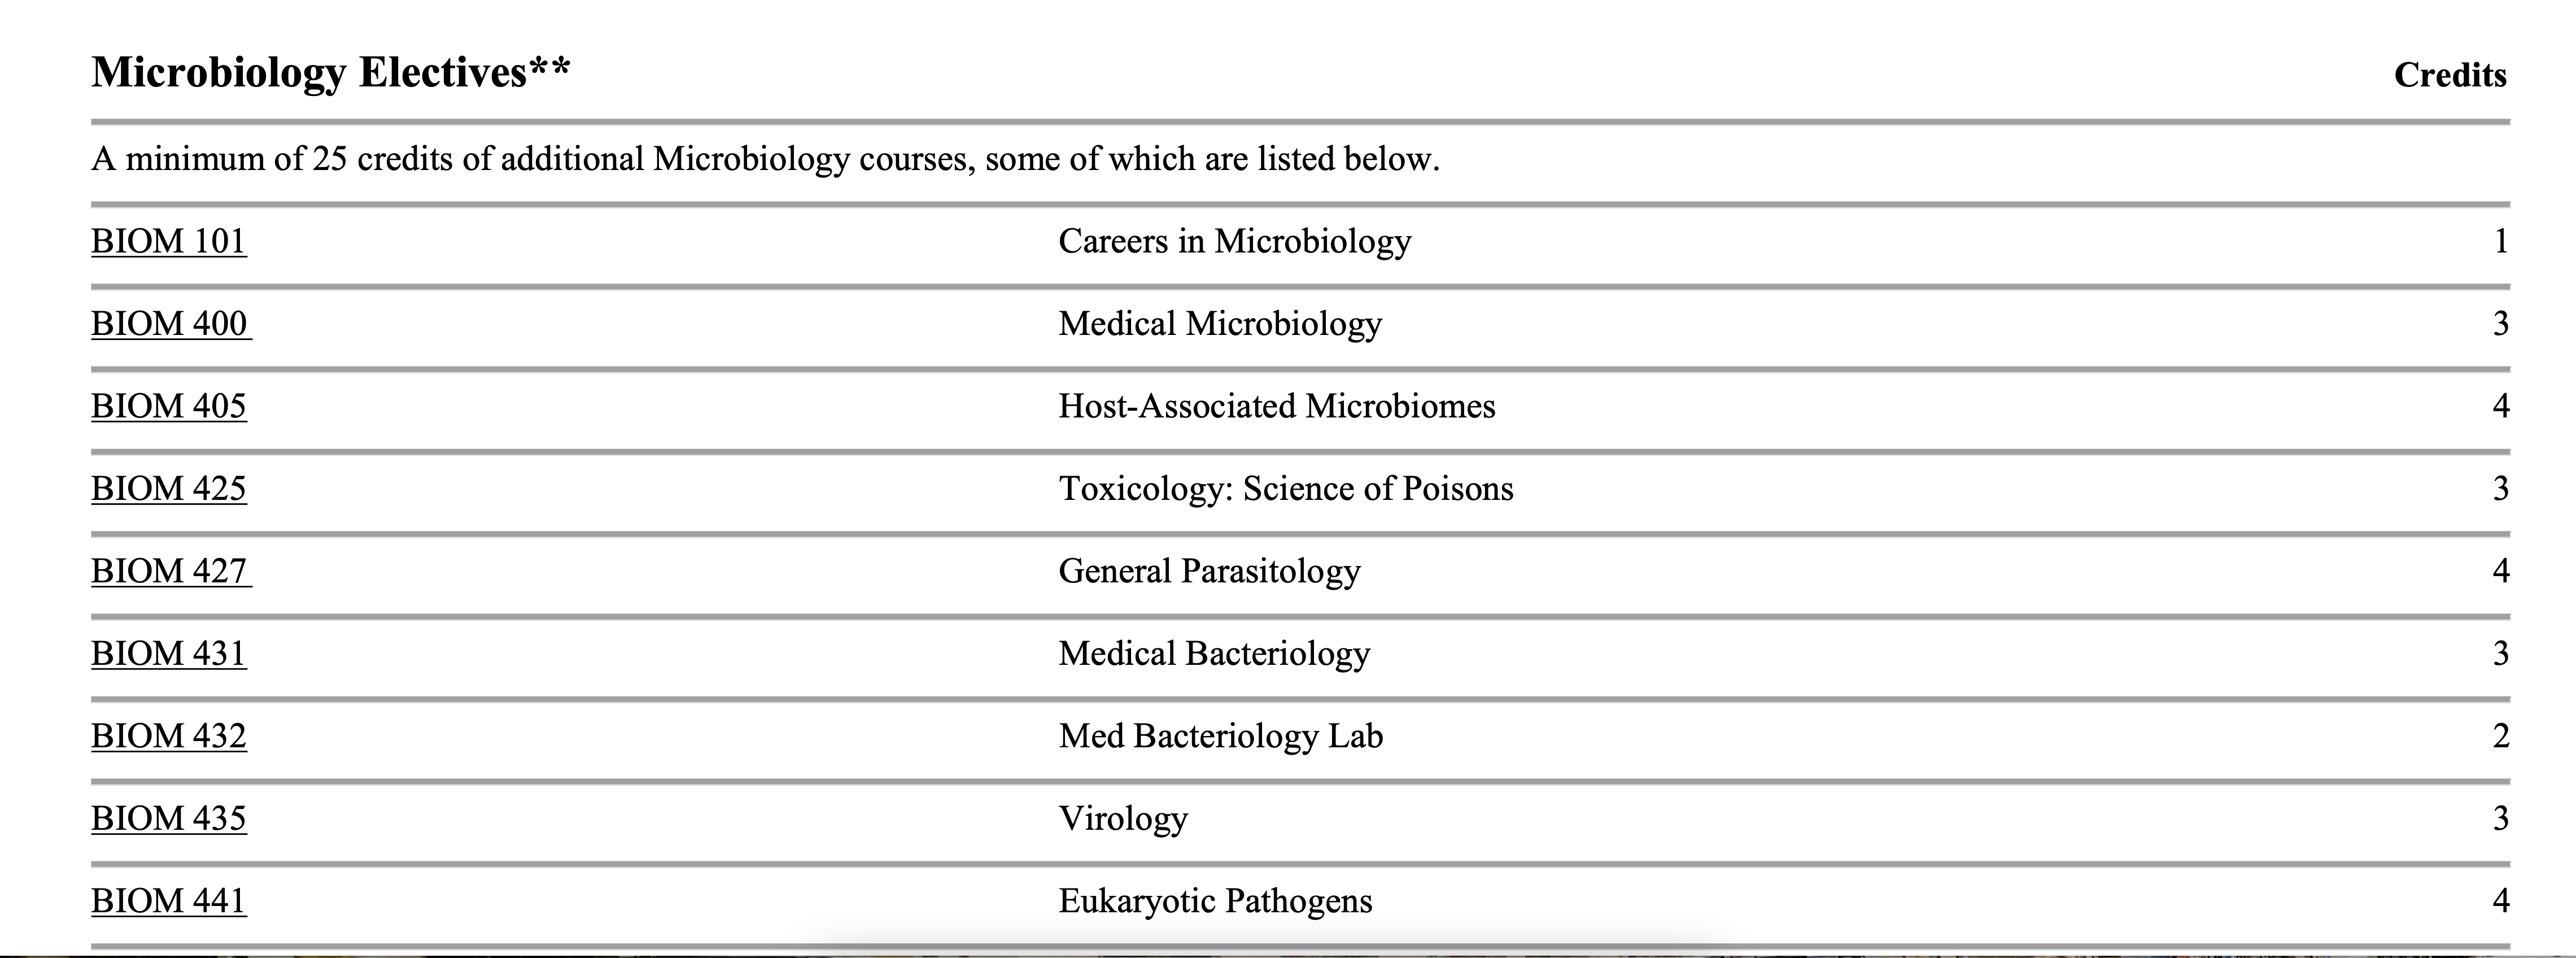 Microbiology Electives